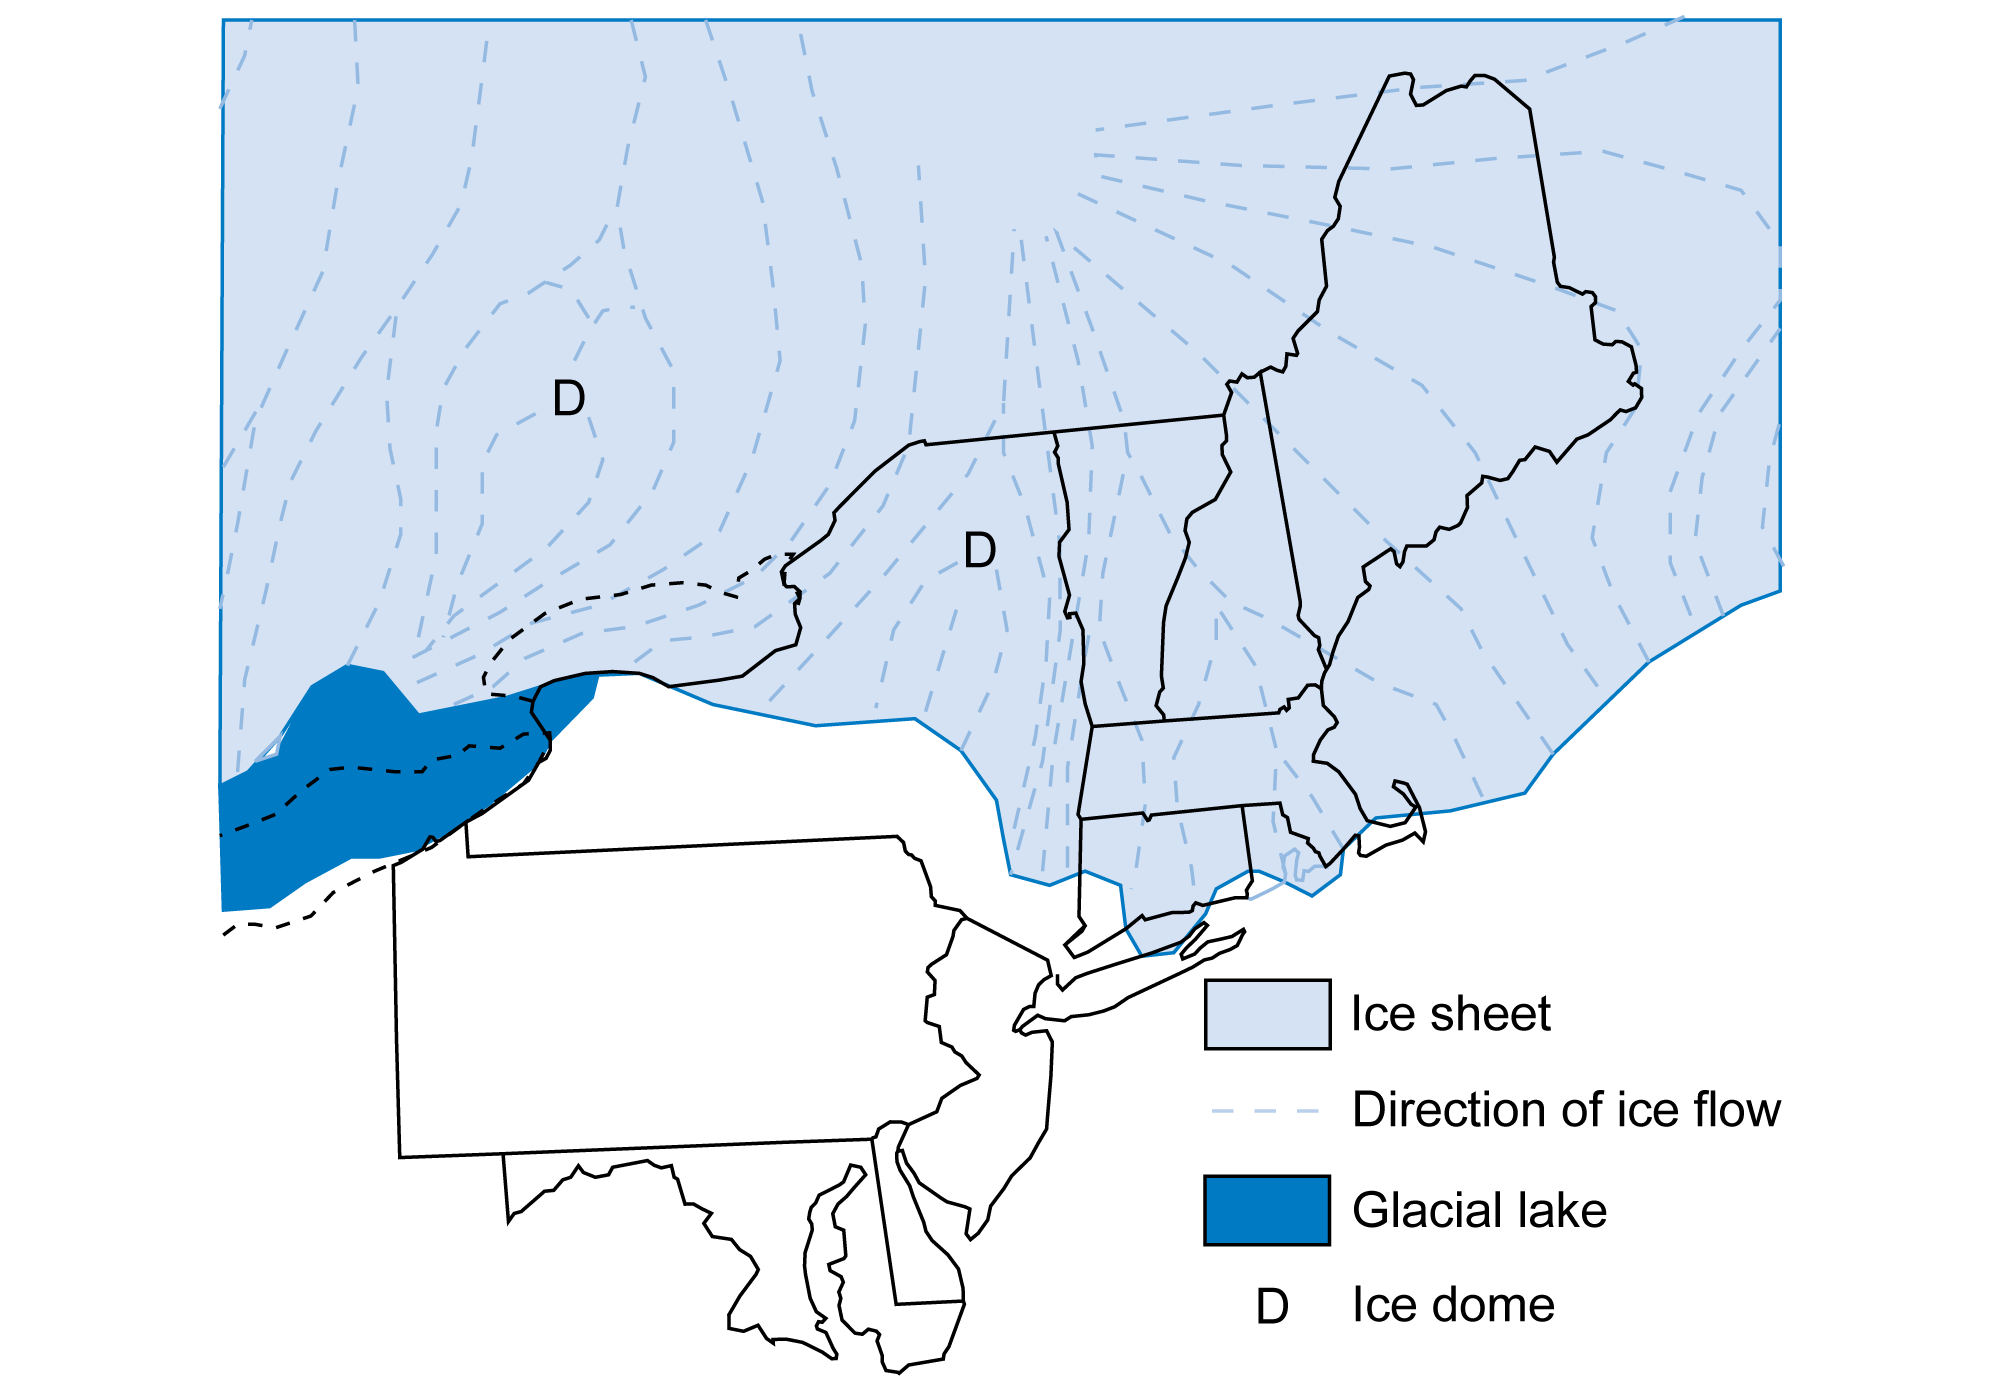 Map of the northeastern United States 18,000 years ago with state boundaries outlined in black. The continental ice sheet is shaded light blue. It borders the north shore of a glacial lake in the position of modern-day lake Erie, runs through eastern New York, dips down into Connecticut, Rhode Island, and Massachusetts, and continues offshore south of Maine.  Two ice domes are marked, one north of present-day Lake Ontario and one in northeastern New York. Dotted blue lines indicate the direction of ice flow.